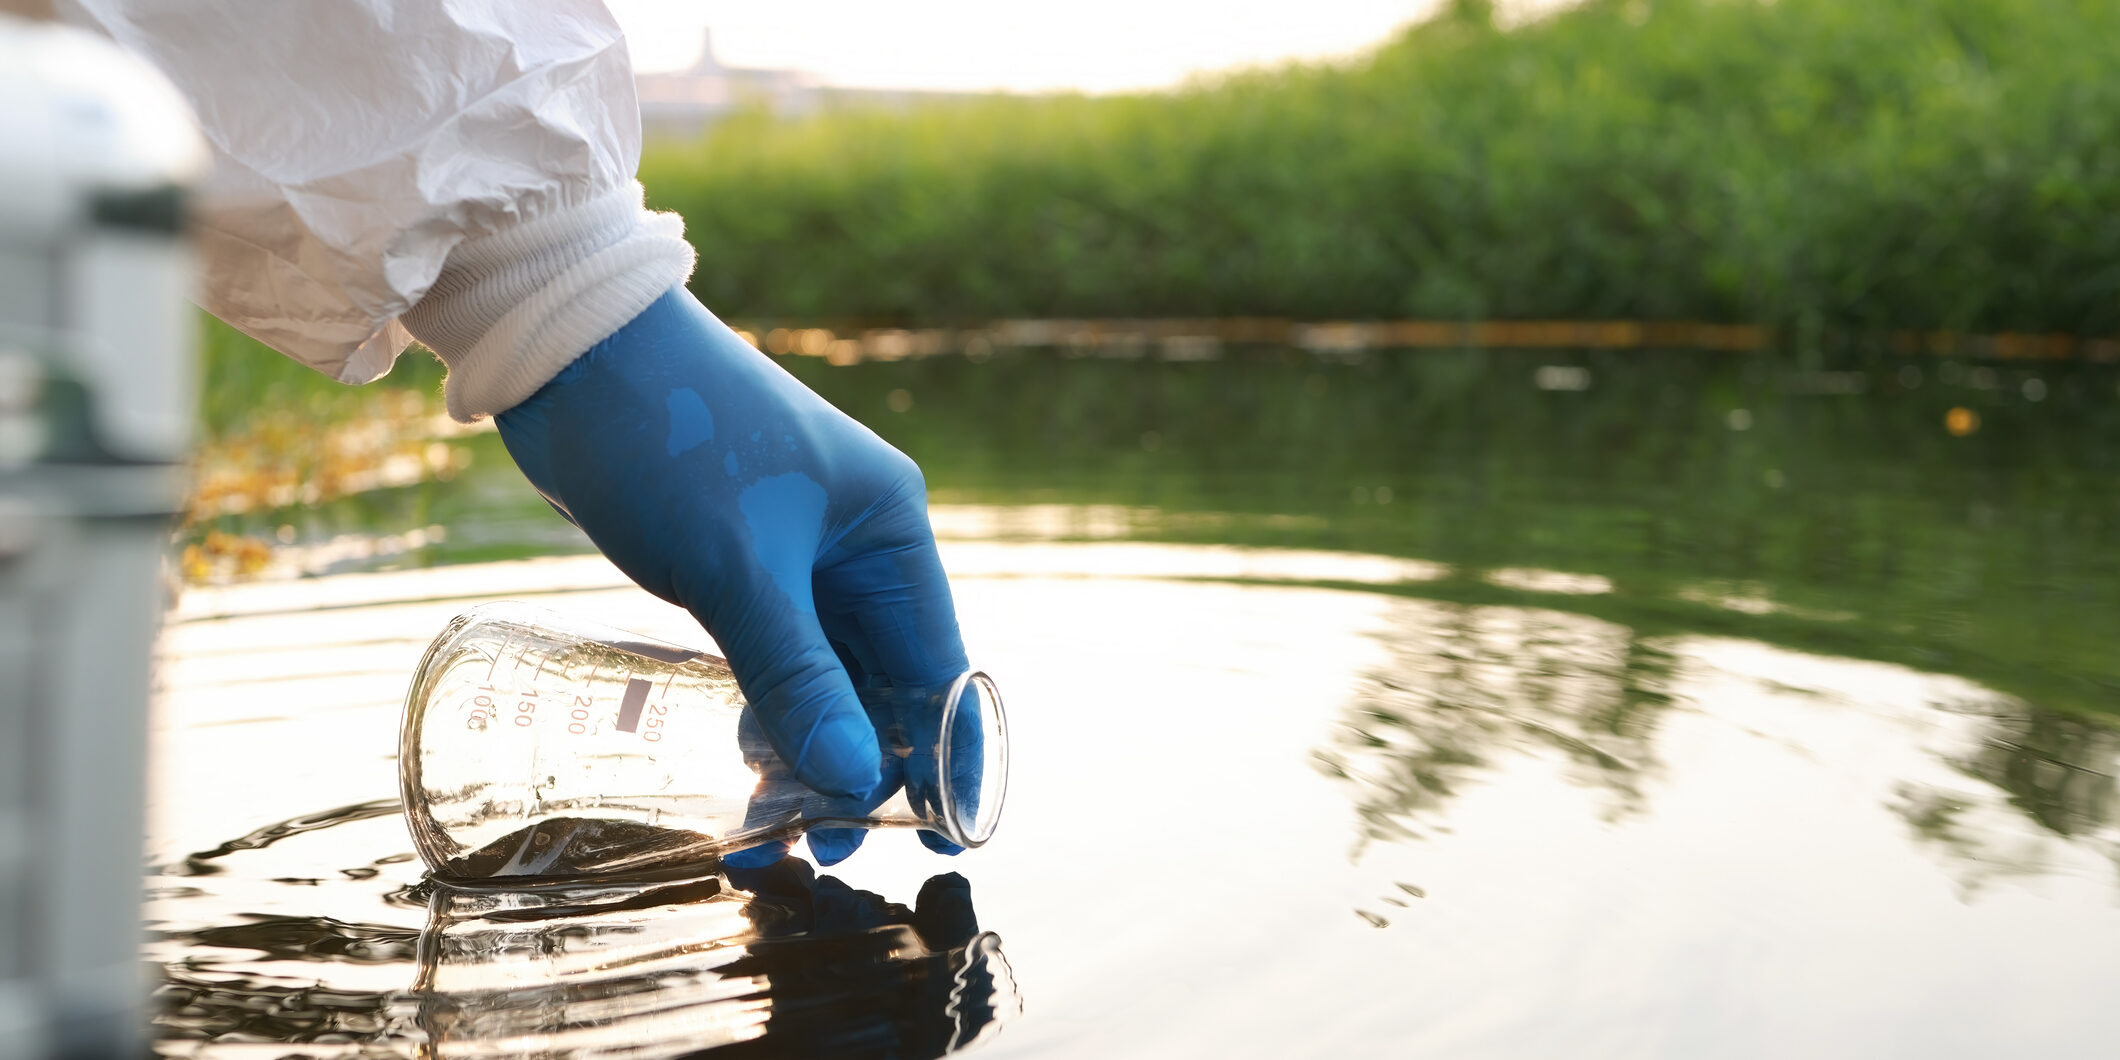 Close up hand with glove Collecting samples of water with a test tube from a body of water with trees in the background